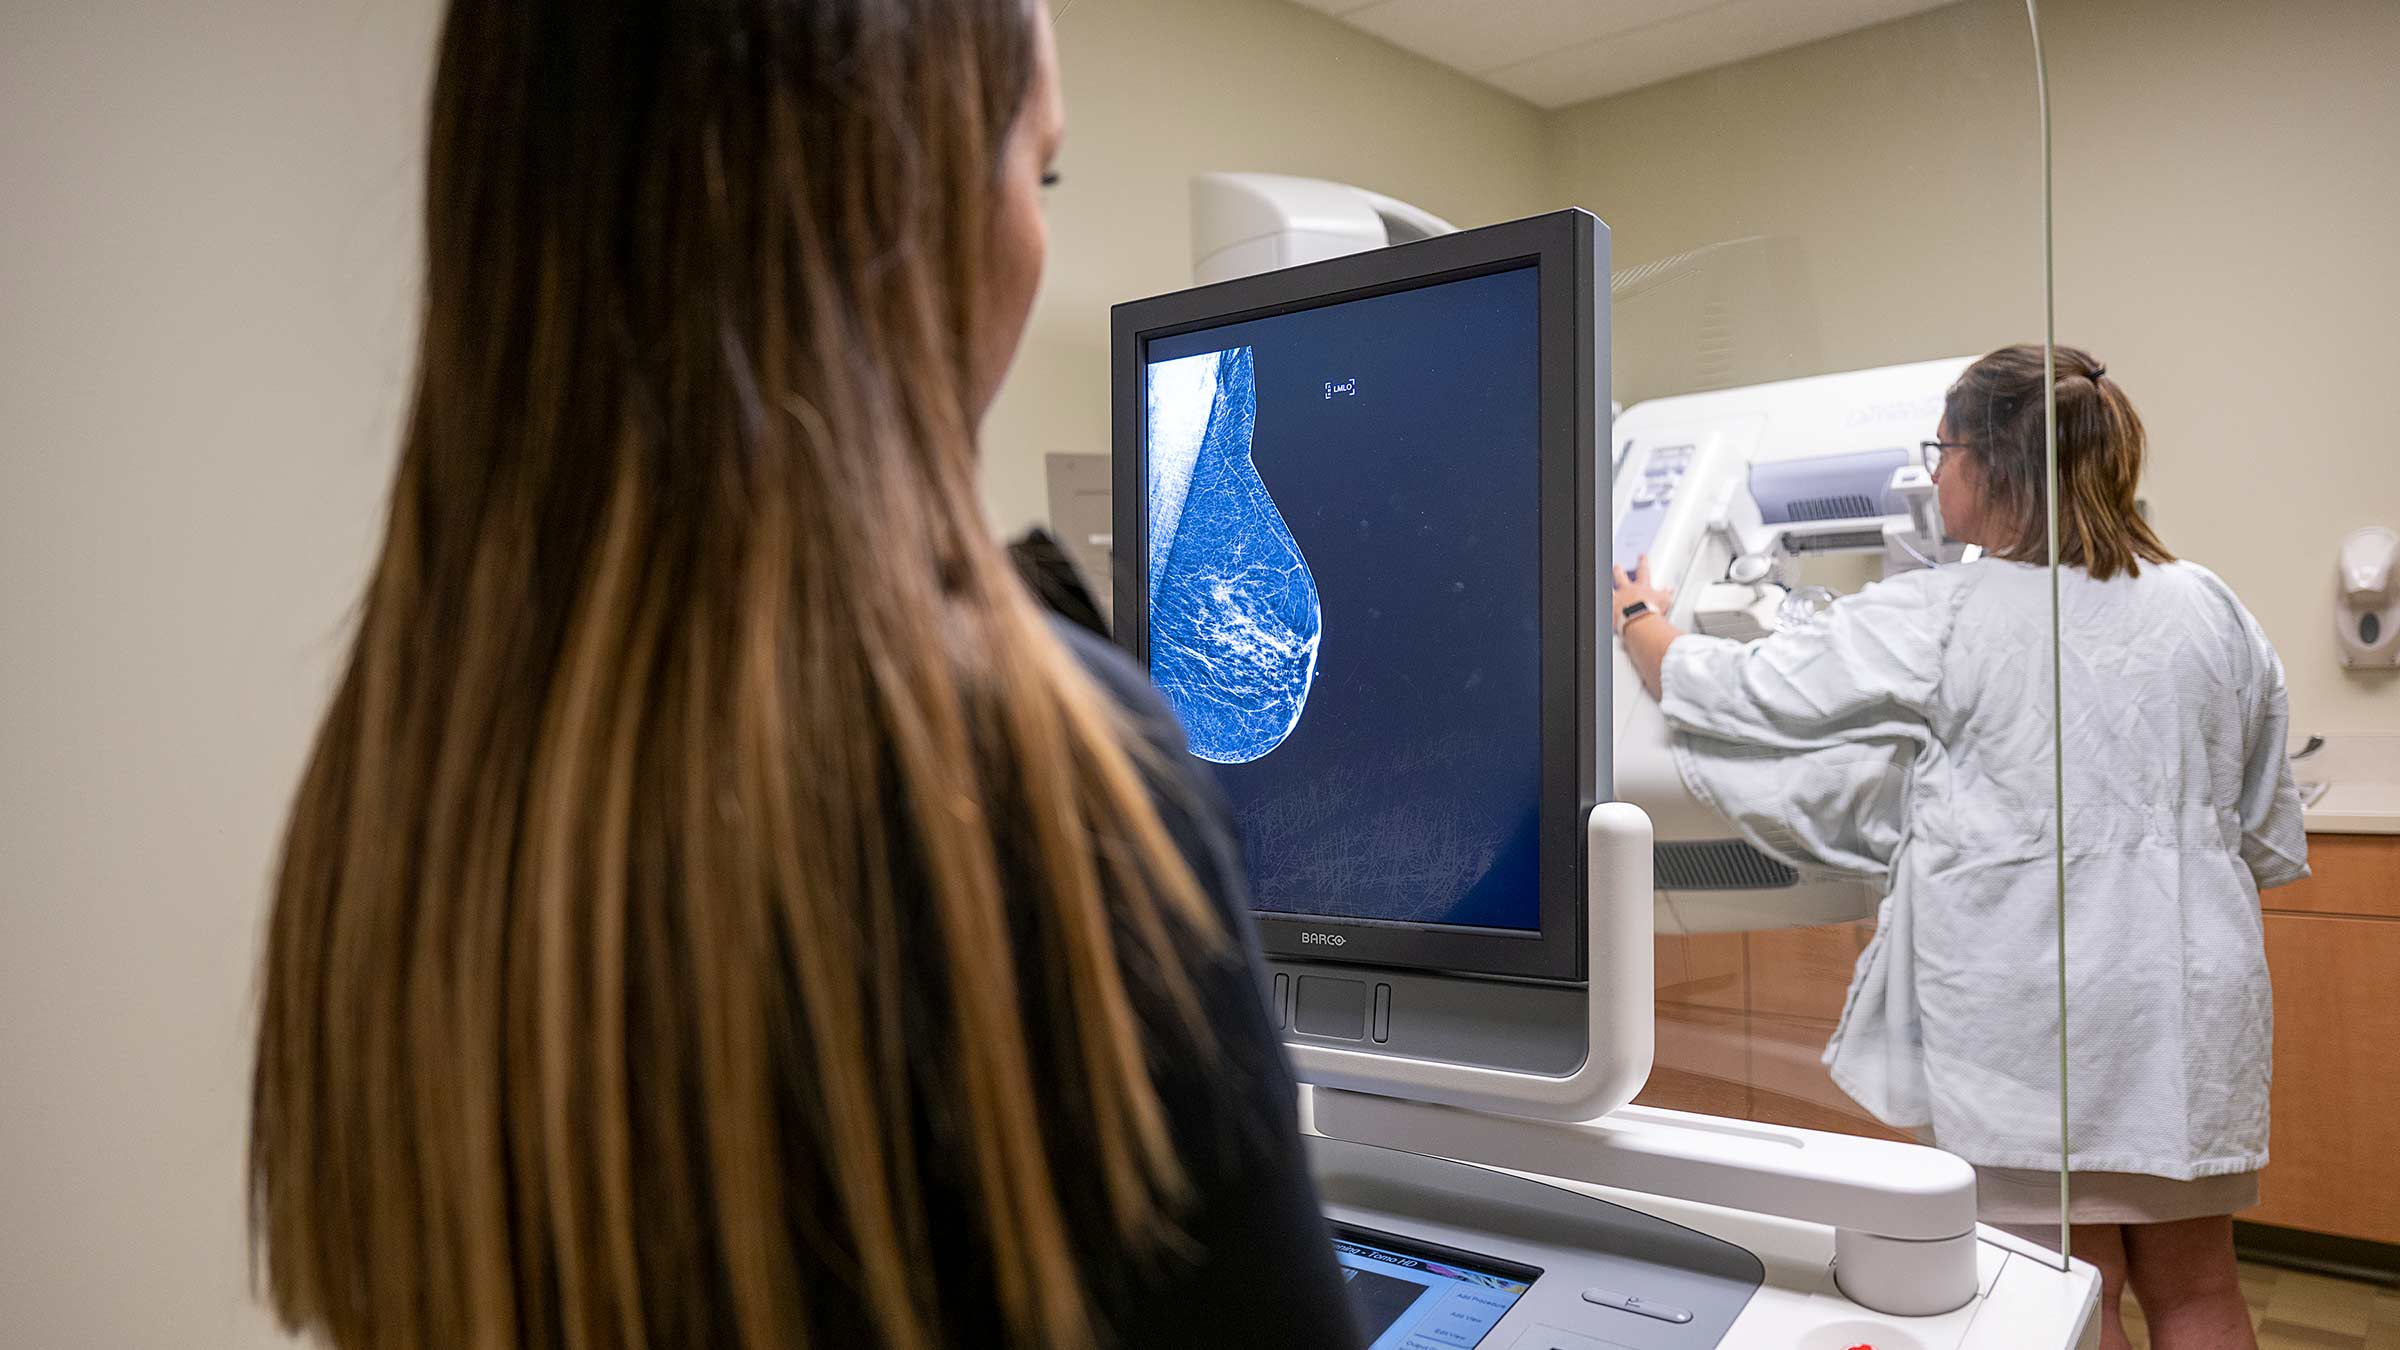 Radiologist looking at a breast scan on the screen